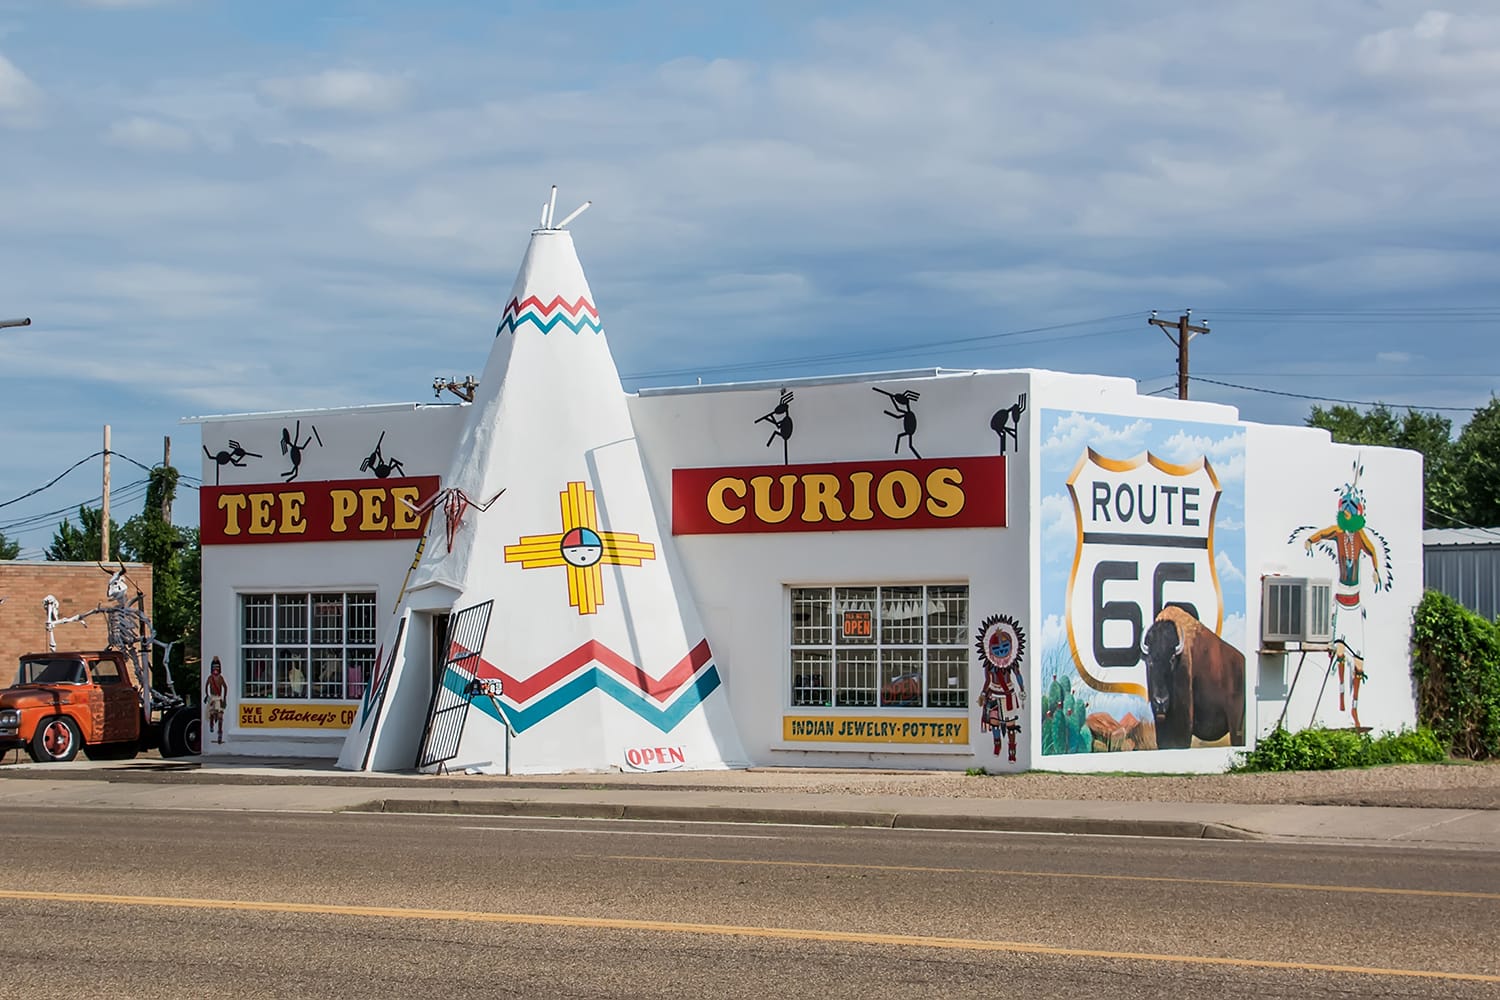 Tee Pee Curios gift shop, a tourist attraction on historic US Route 66 in New Mexico